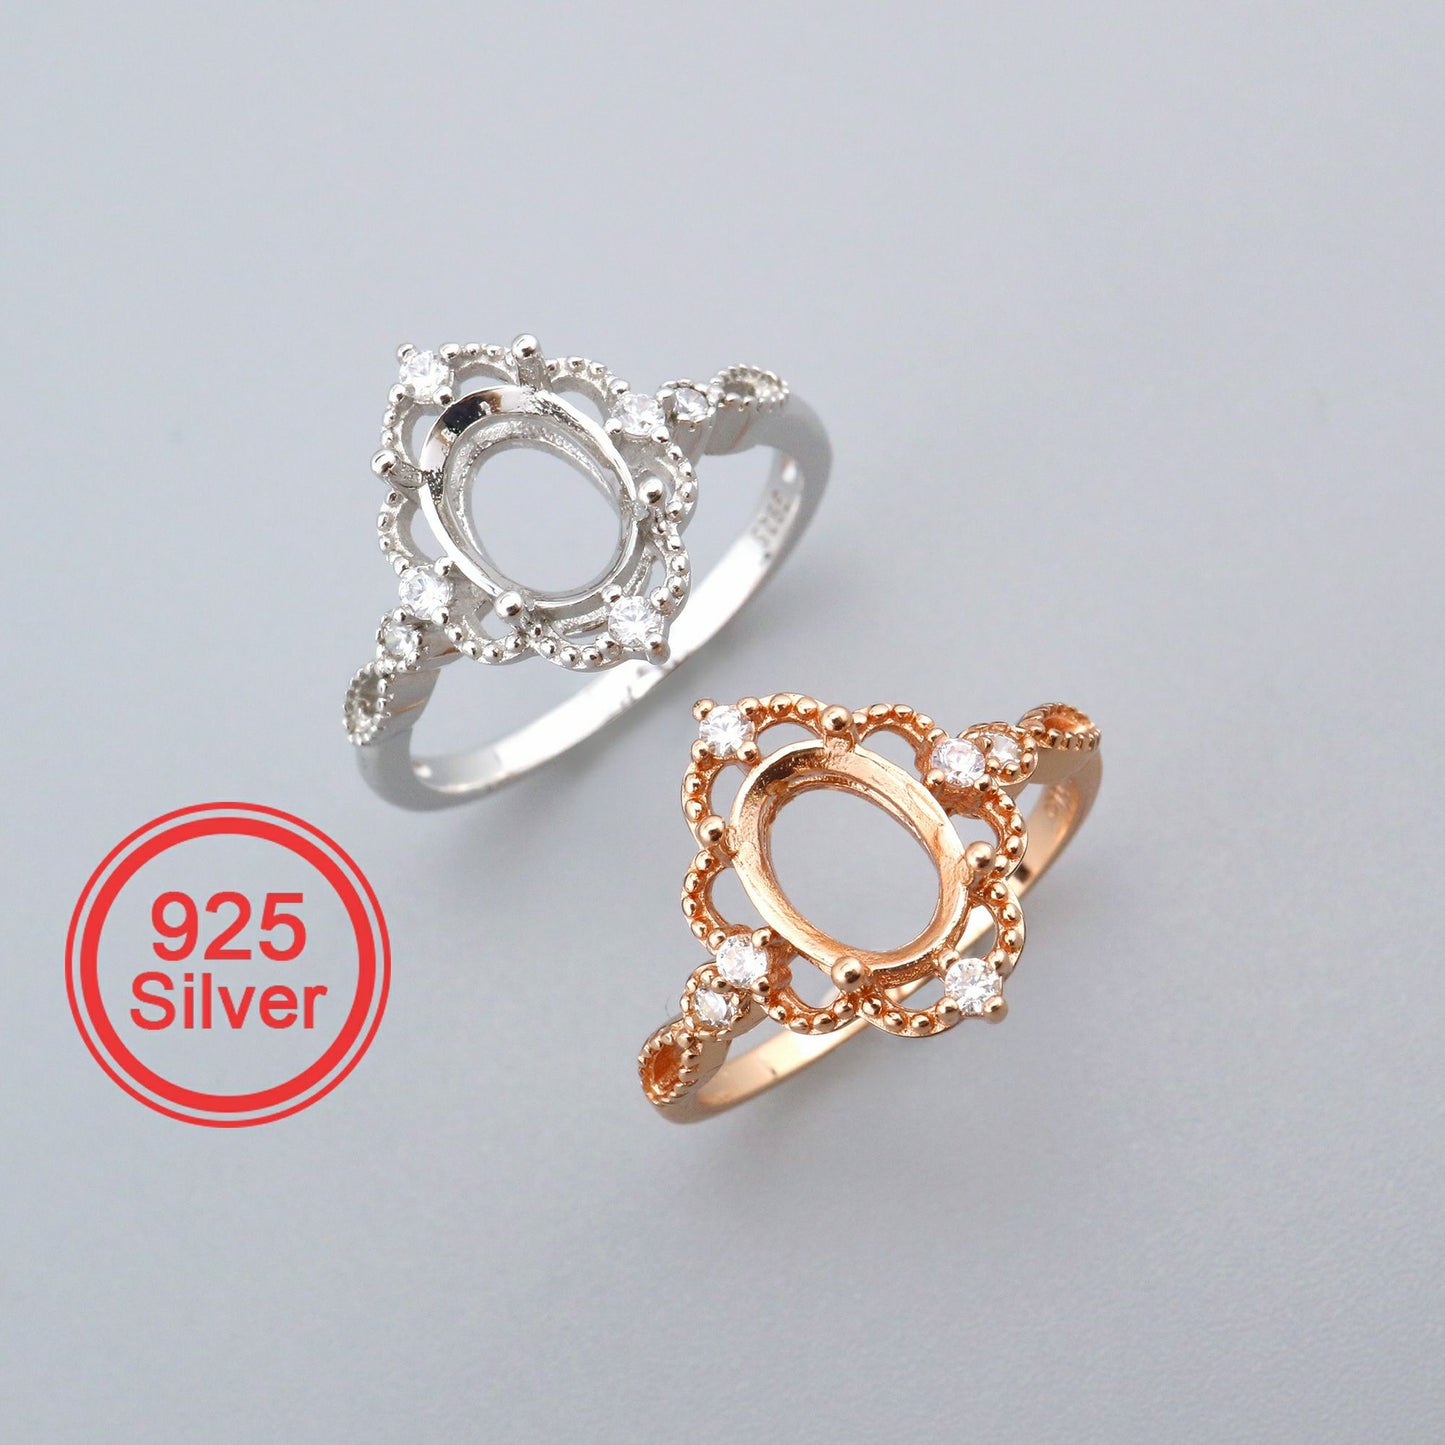 One silver and one rose gold lacey style oval vintage halo semi mounts.